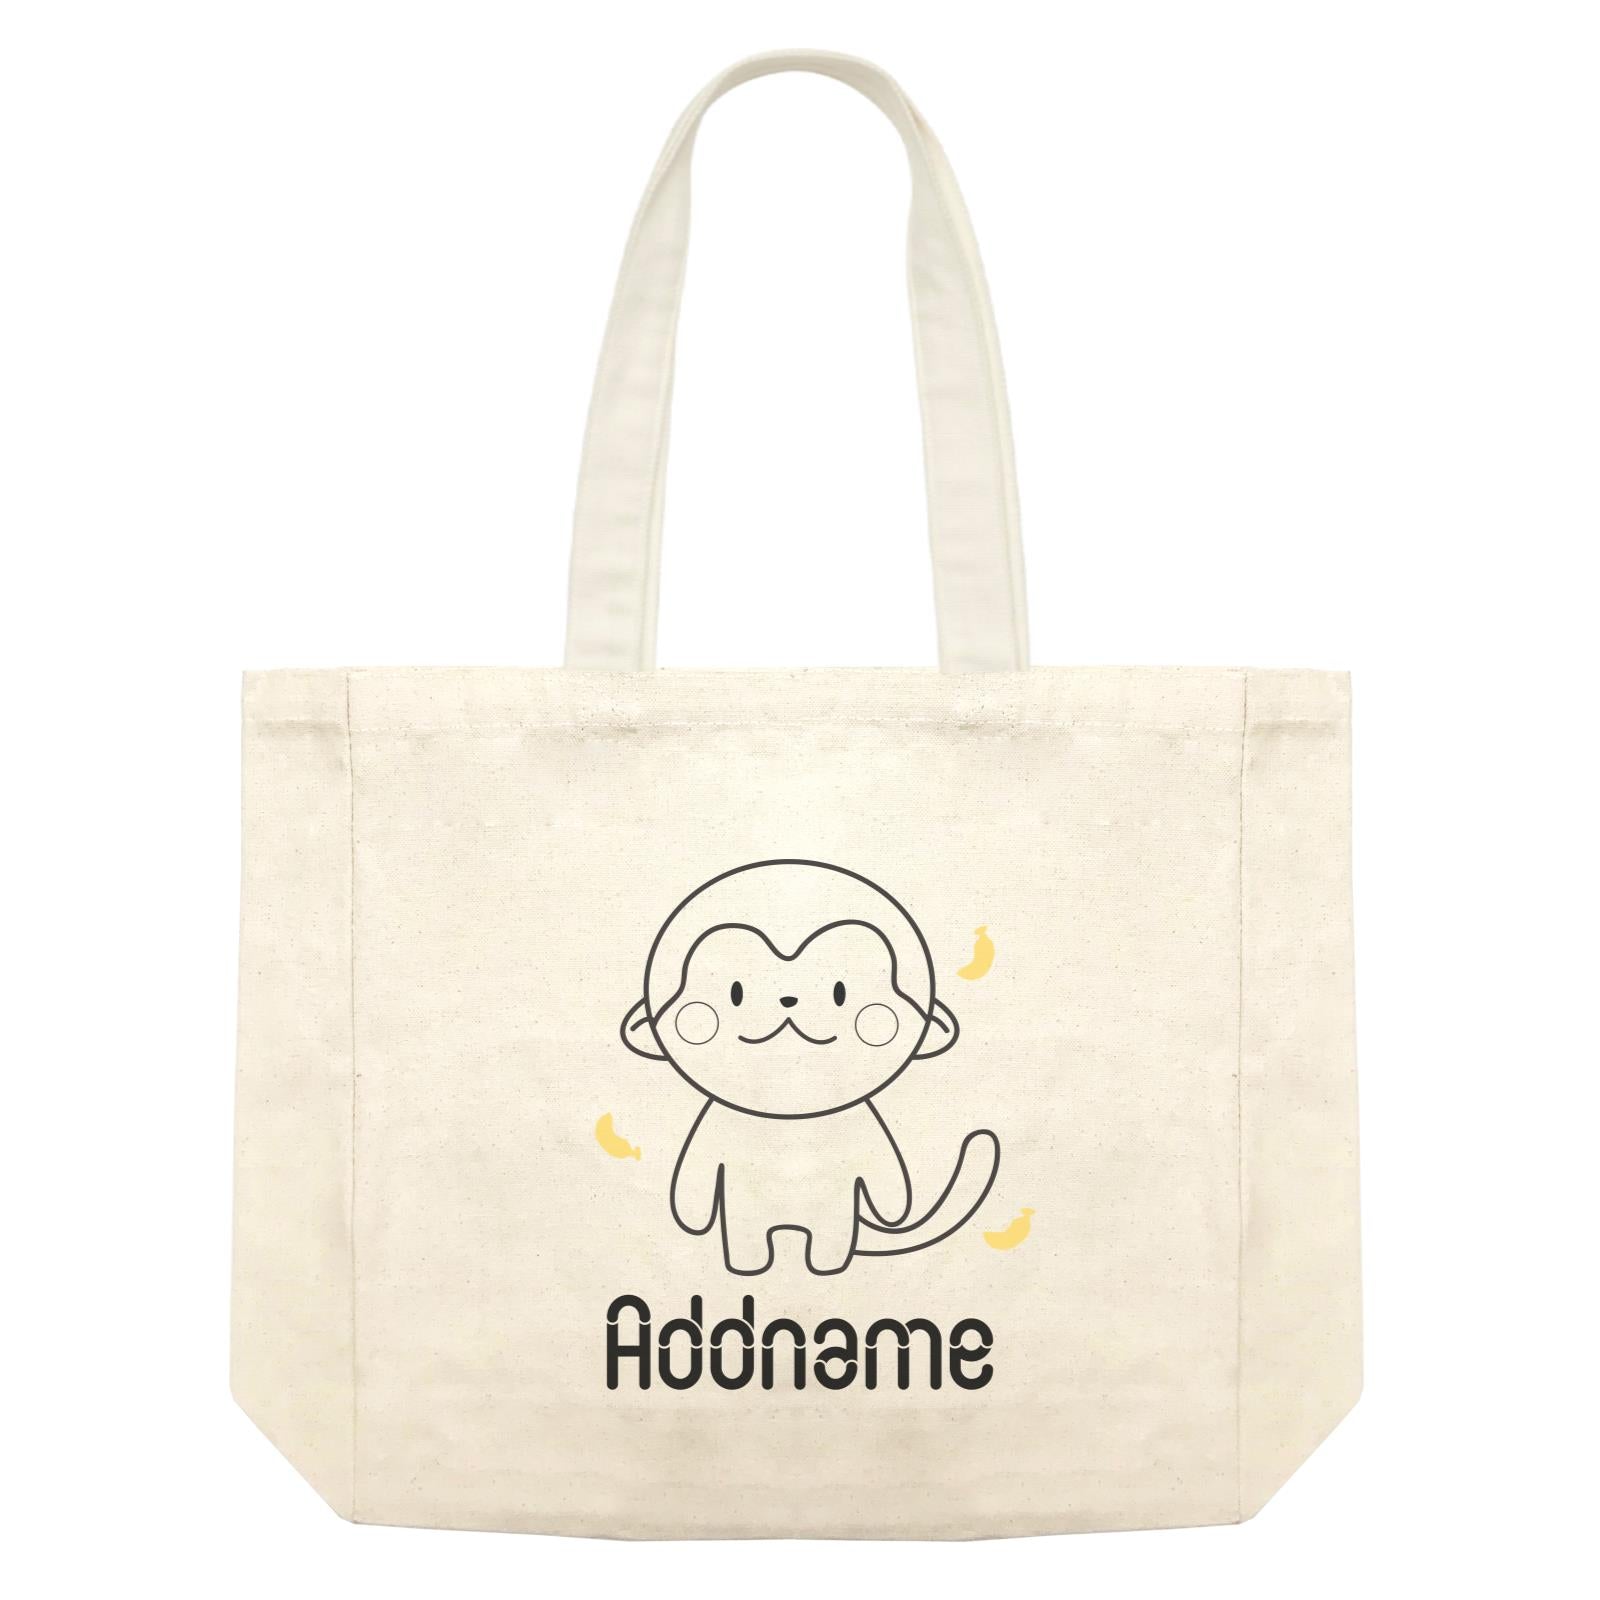 Coloring Outline Cute Hand Drawn Animals Furry Monkey Addname Shopping Bag